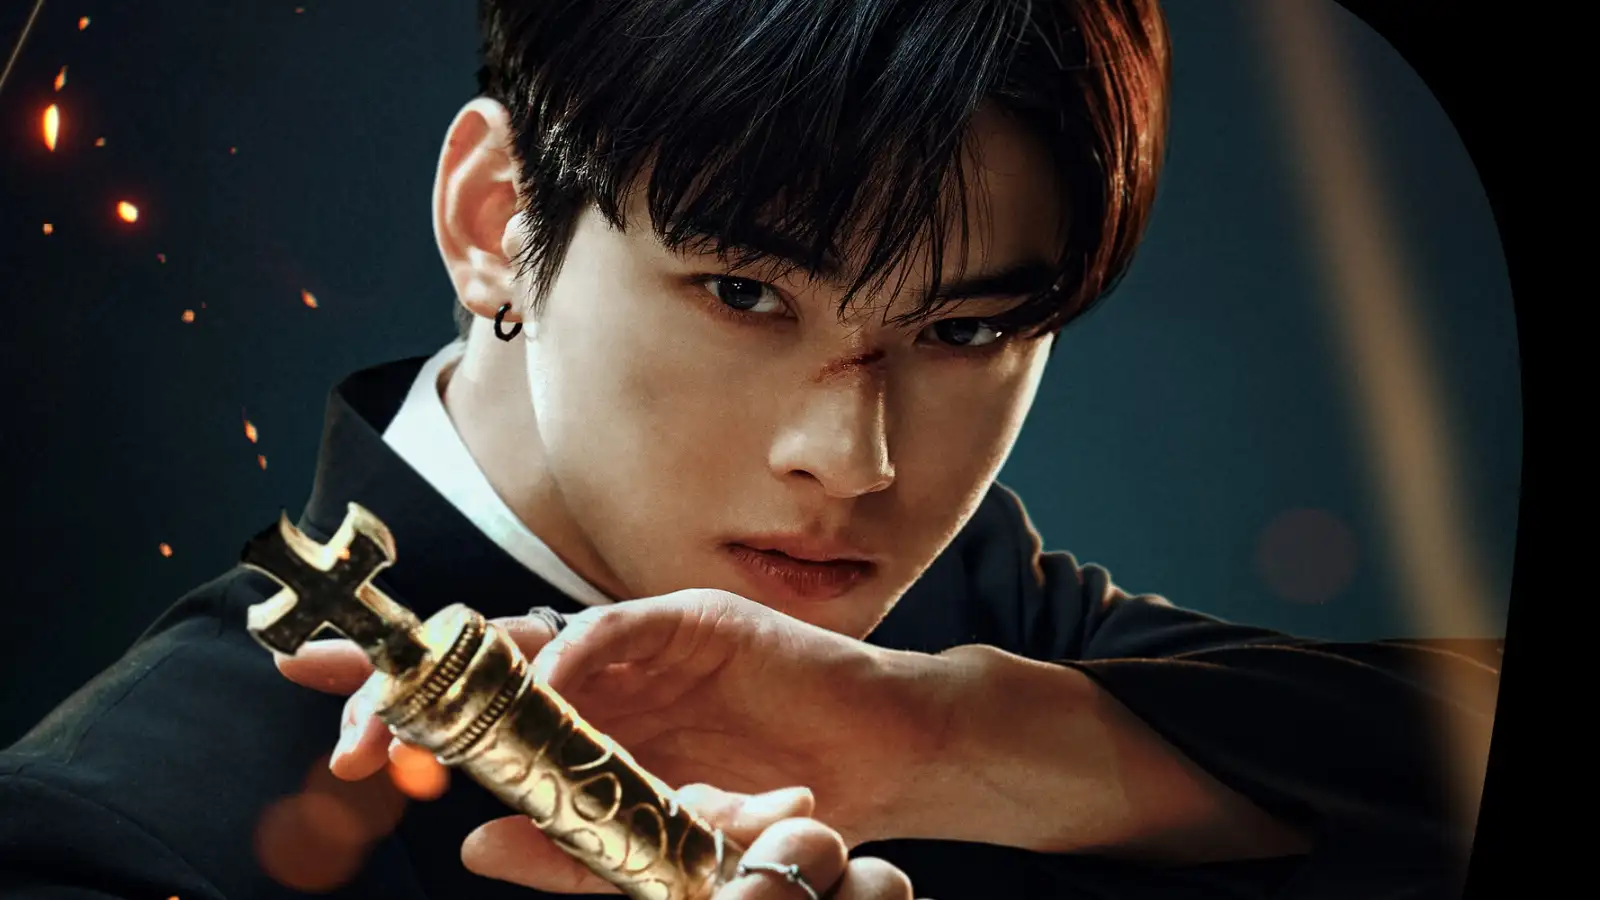 ASTRO Cha Eun Woo Updates Fans With New Photos